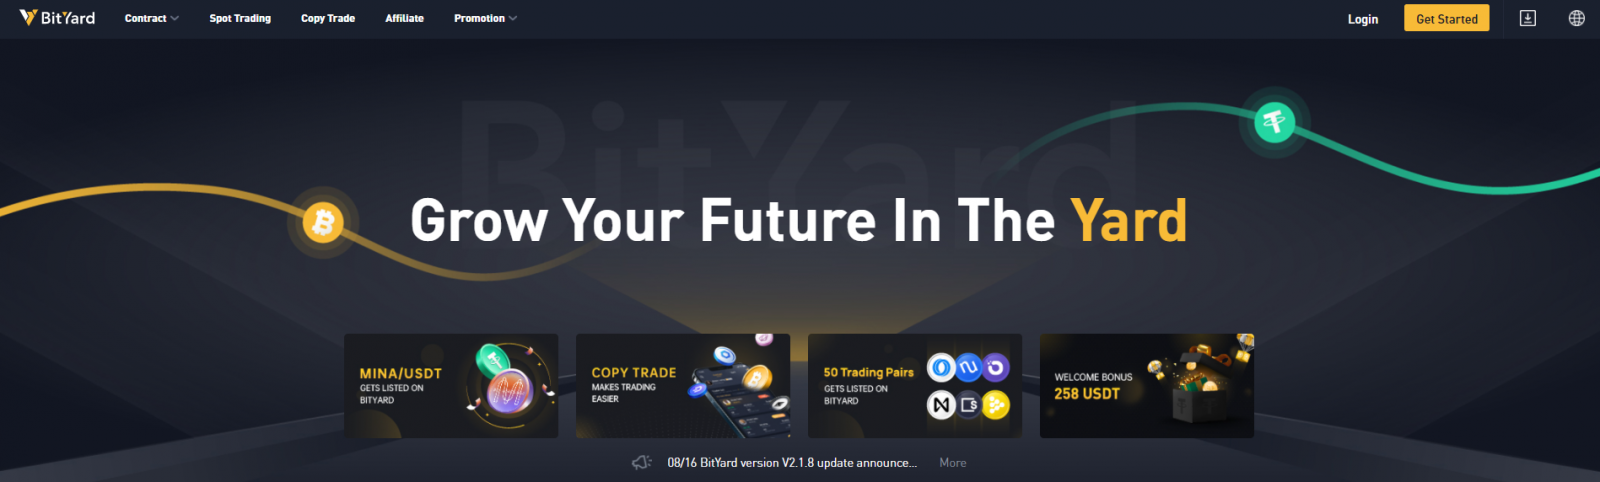 How to Register and Trade Crypto at BitYard